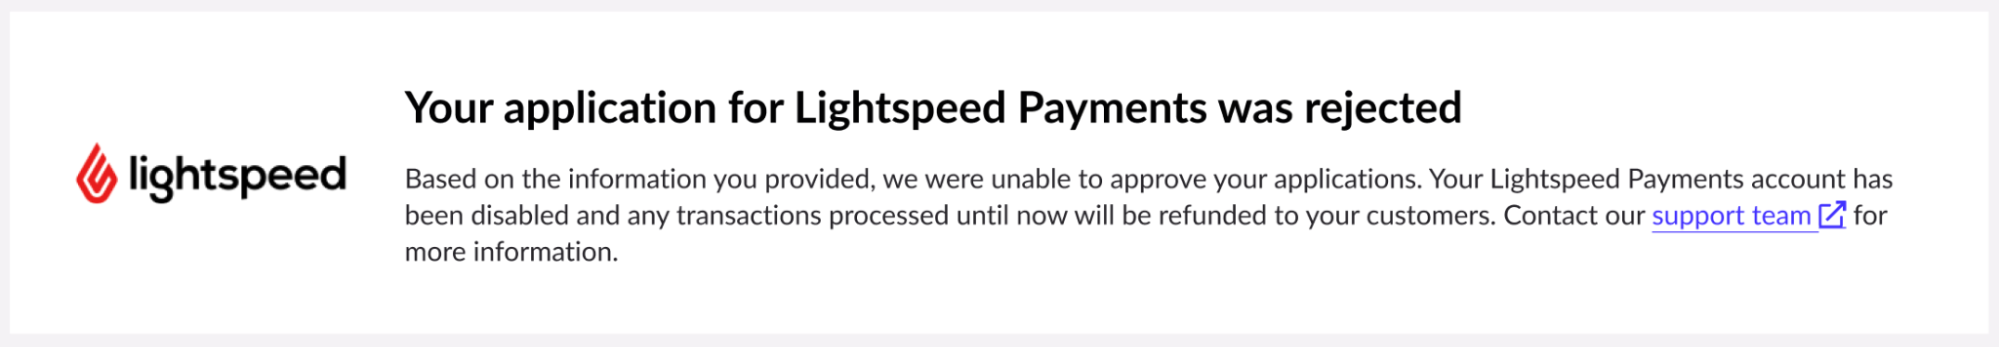 LS-Pay-Application-Rejected.png